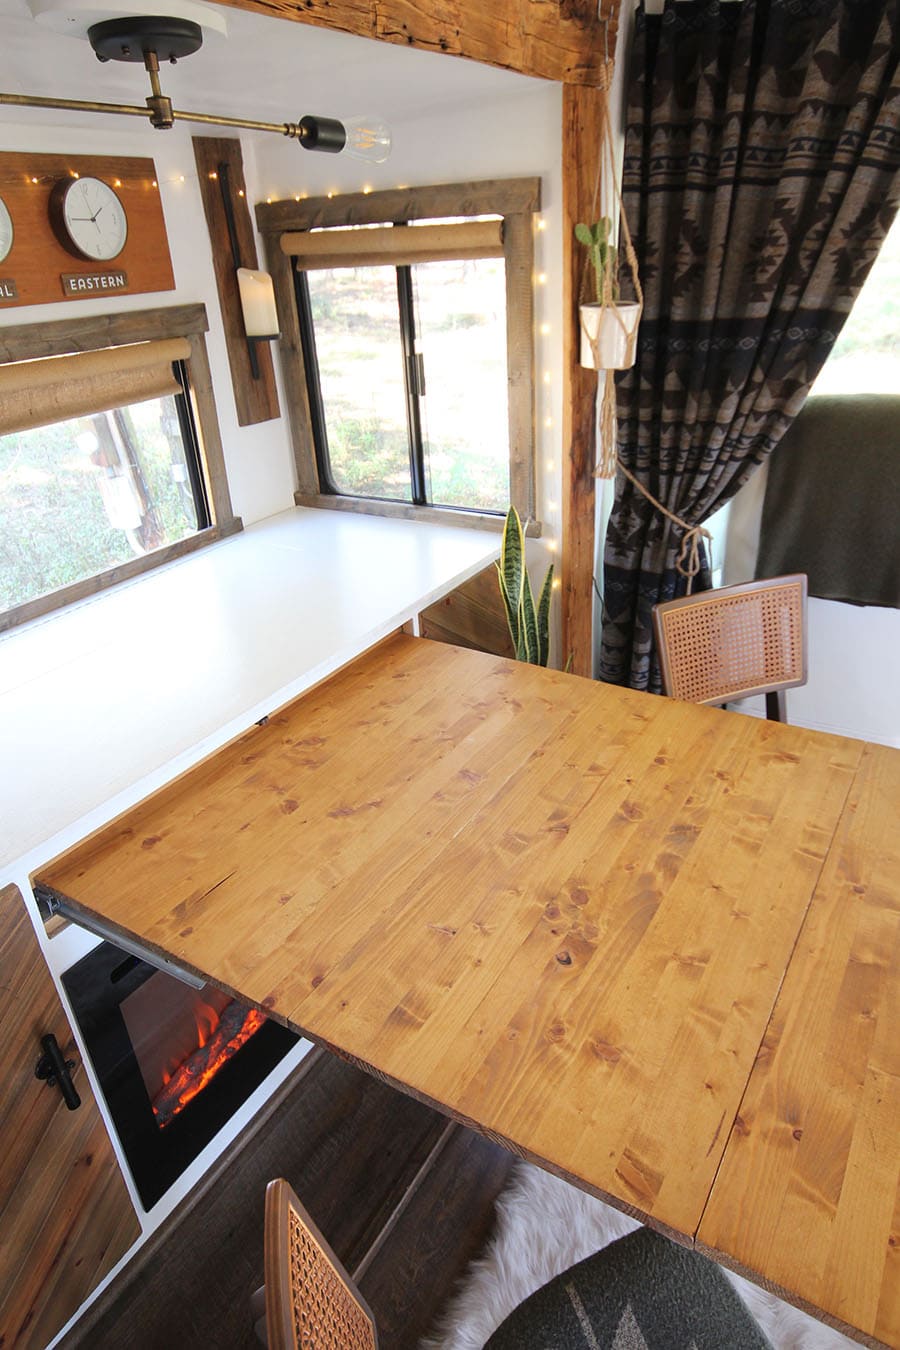 DIY expandable table (that\'s hidden when not in use)